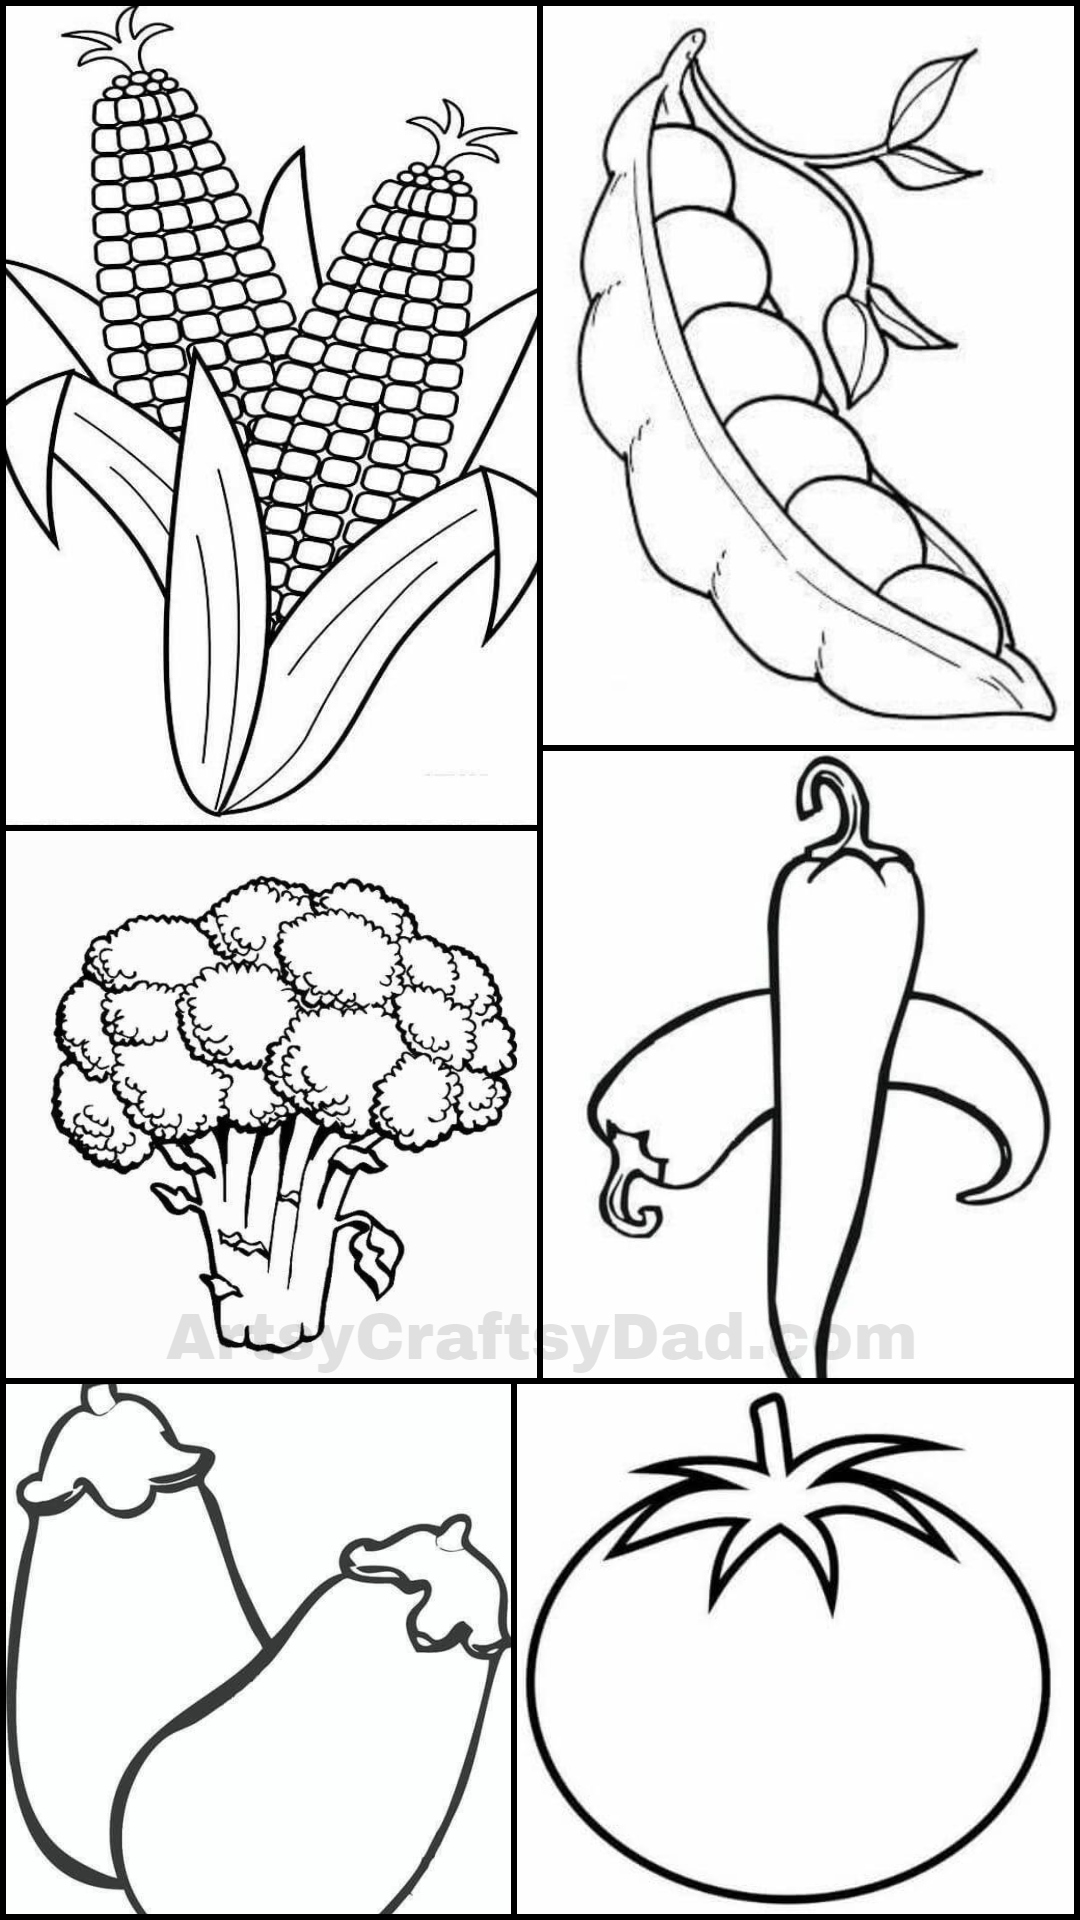 Free Vegetables​​​​​​​​ Coloring Printable Pages and Worksheets for Kids